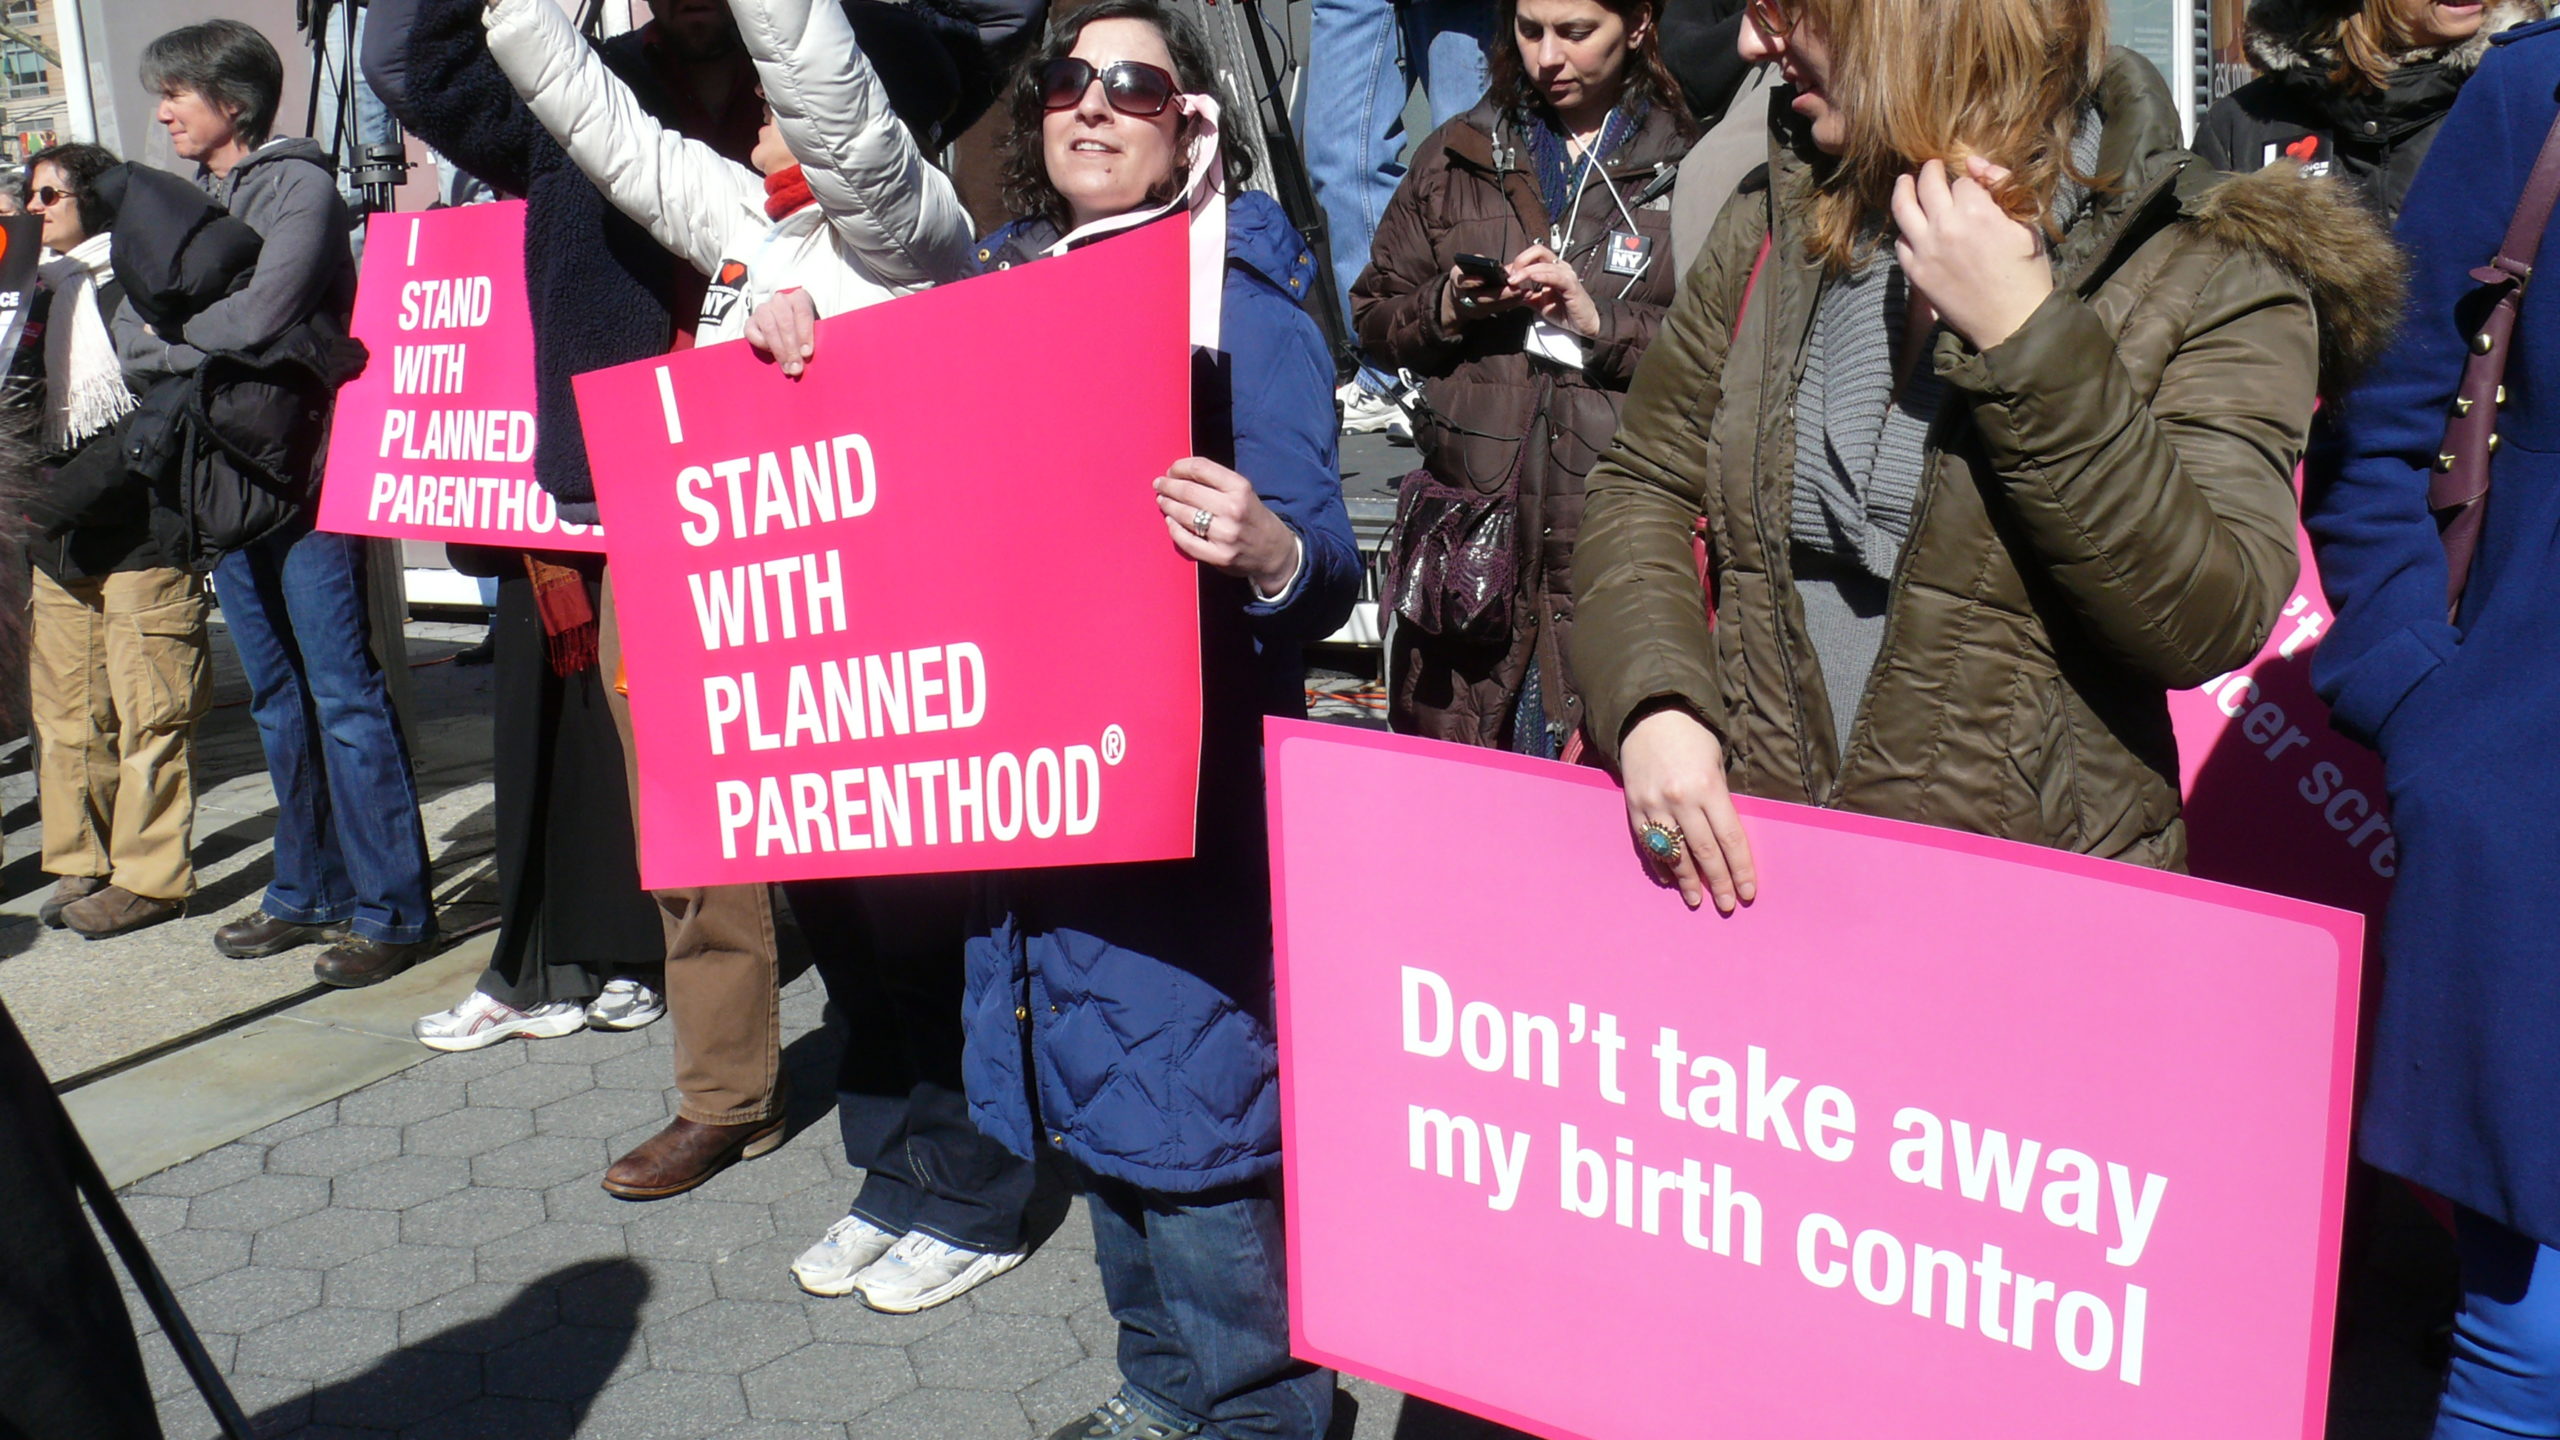 Six Of The Most Ridiculous Planned Parenthood Myths, Debunked